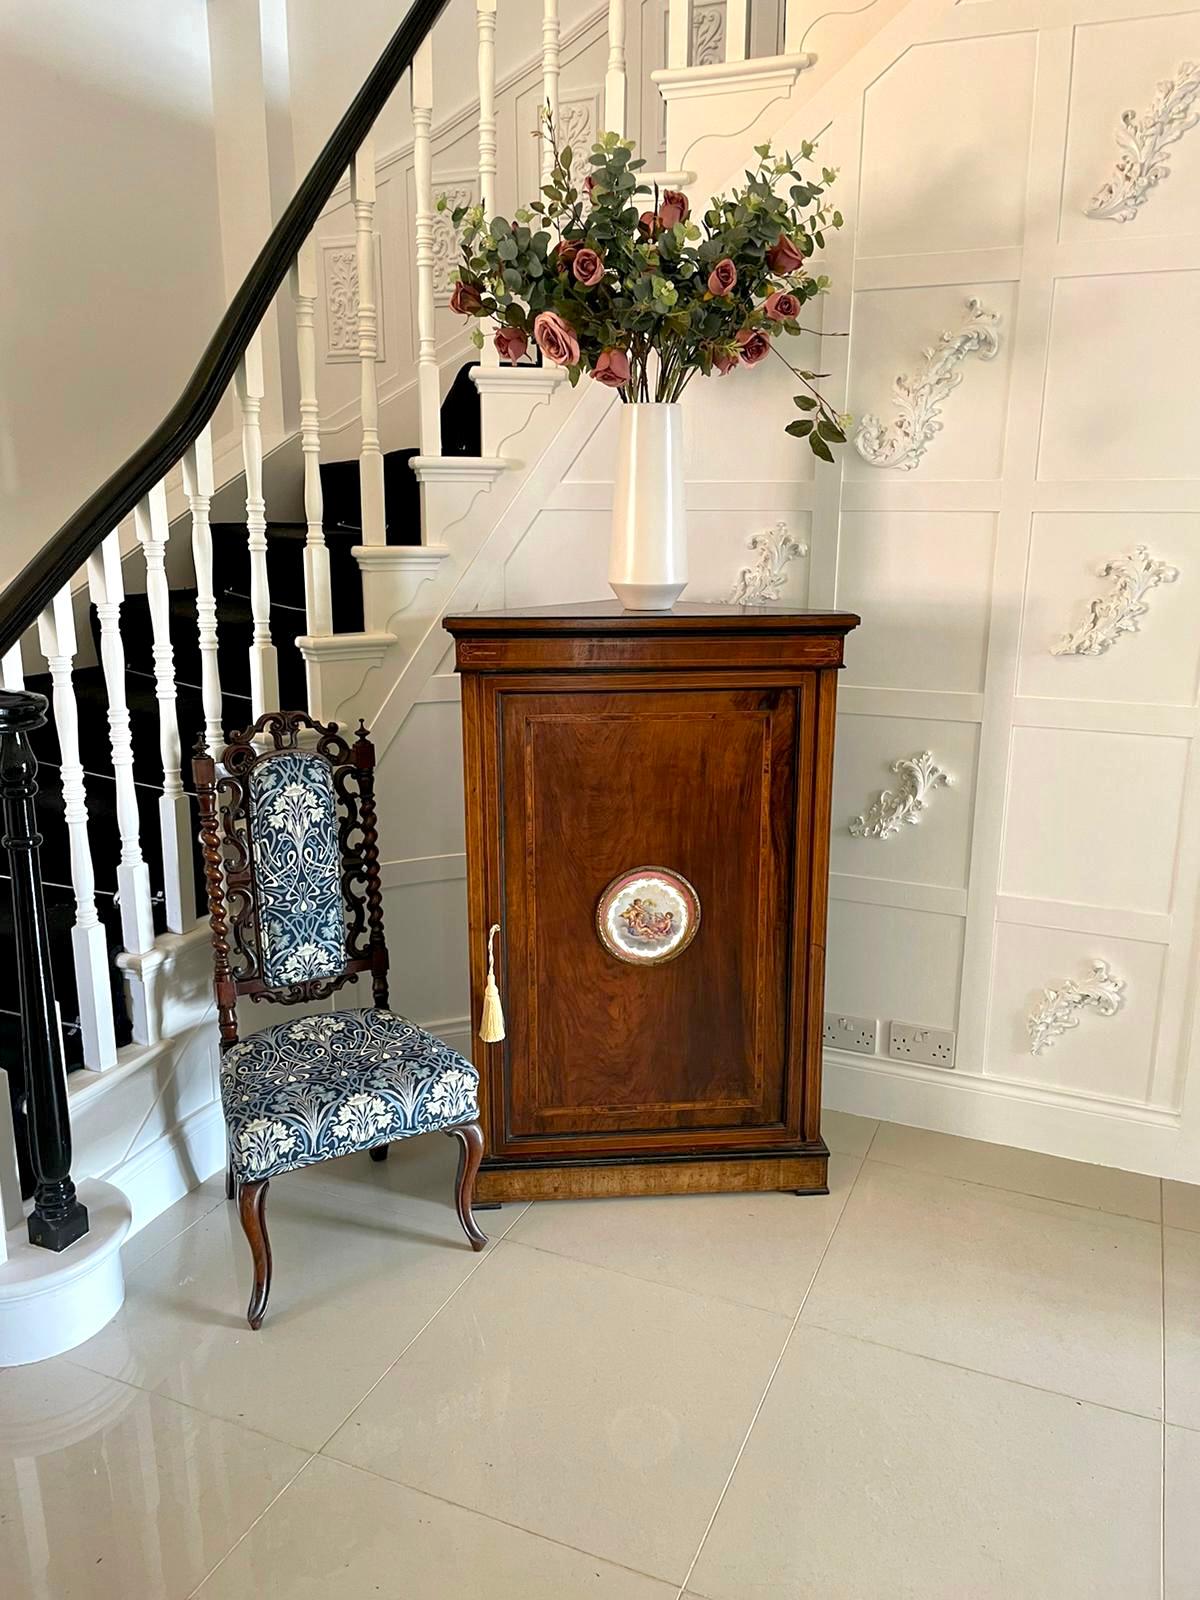 Finest quality 19th Century Victorian antique inlaid walnut corner cabinet having a superb walnut inlaid top and frieze. The door is crossbanded with an exquisite central Sevres style porcelain plaque in an ormolu surround. It stands on a plinth